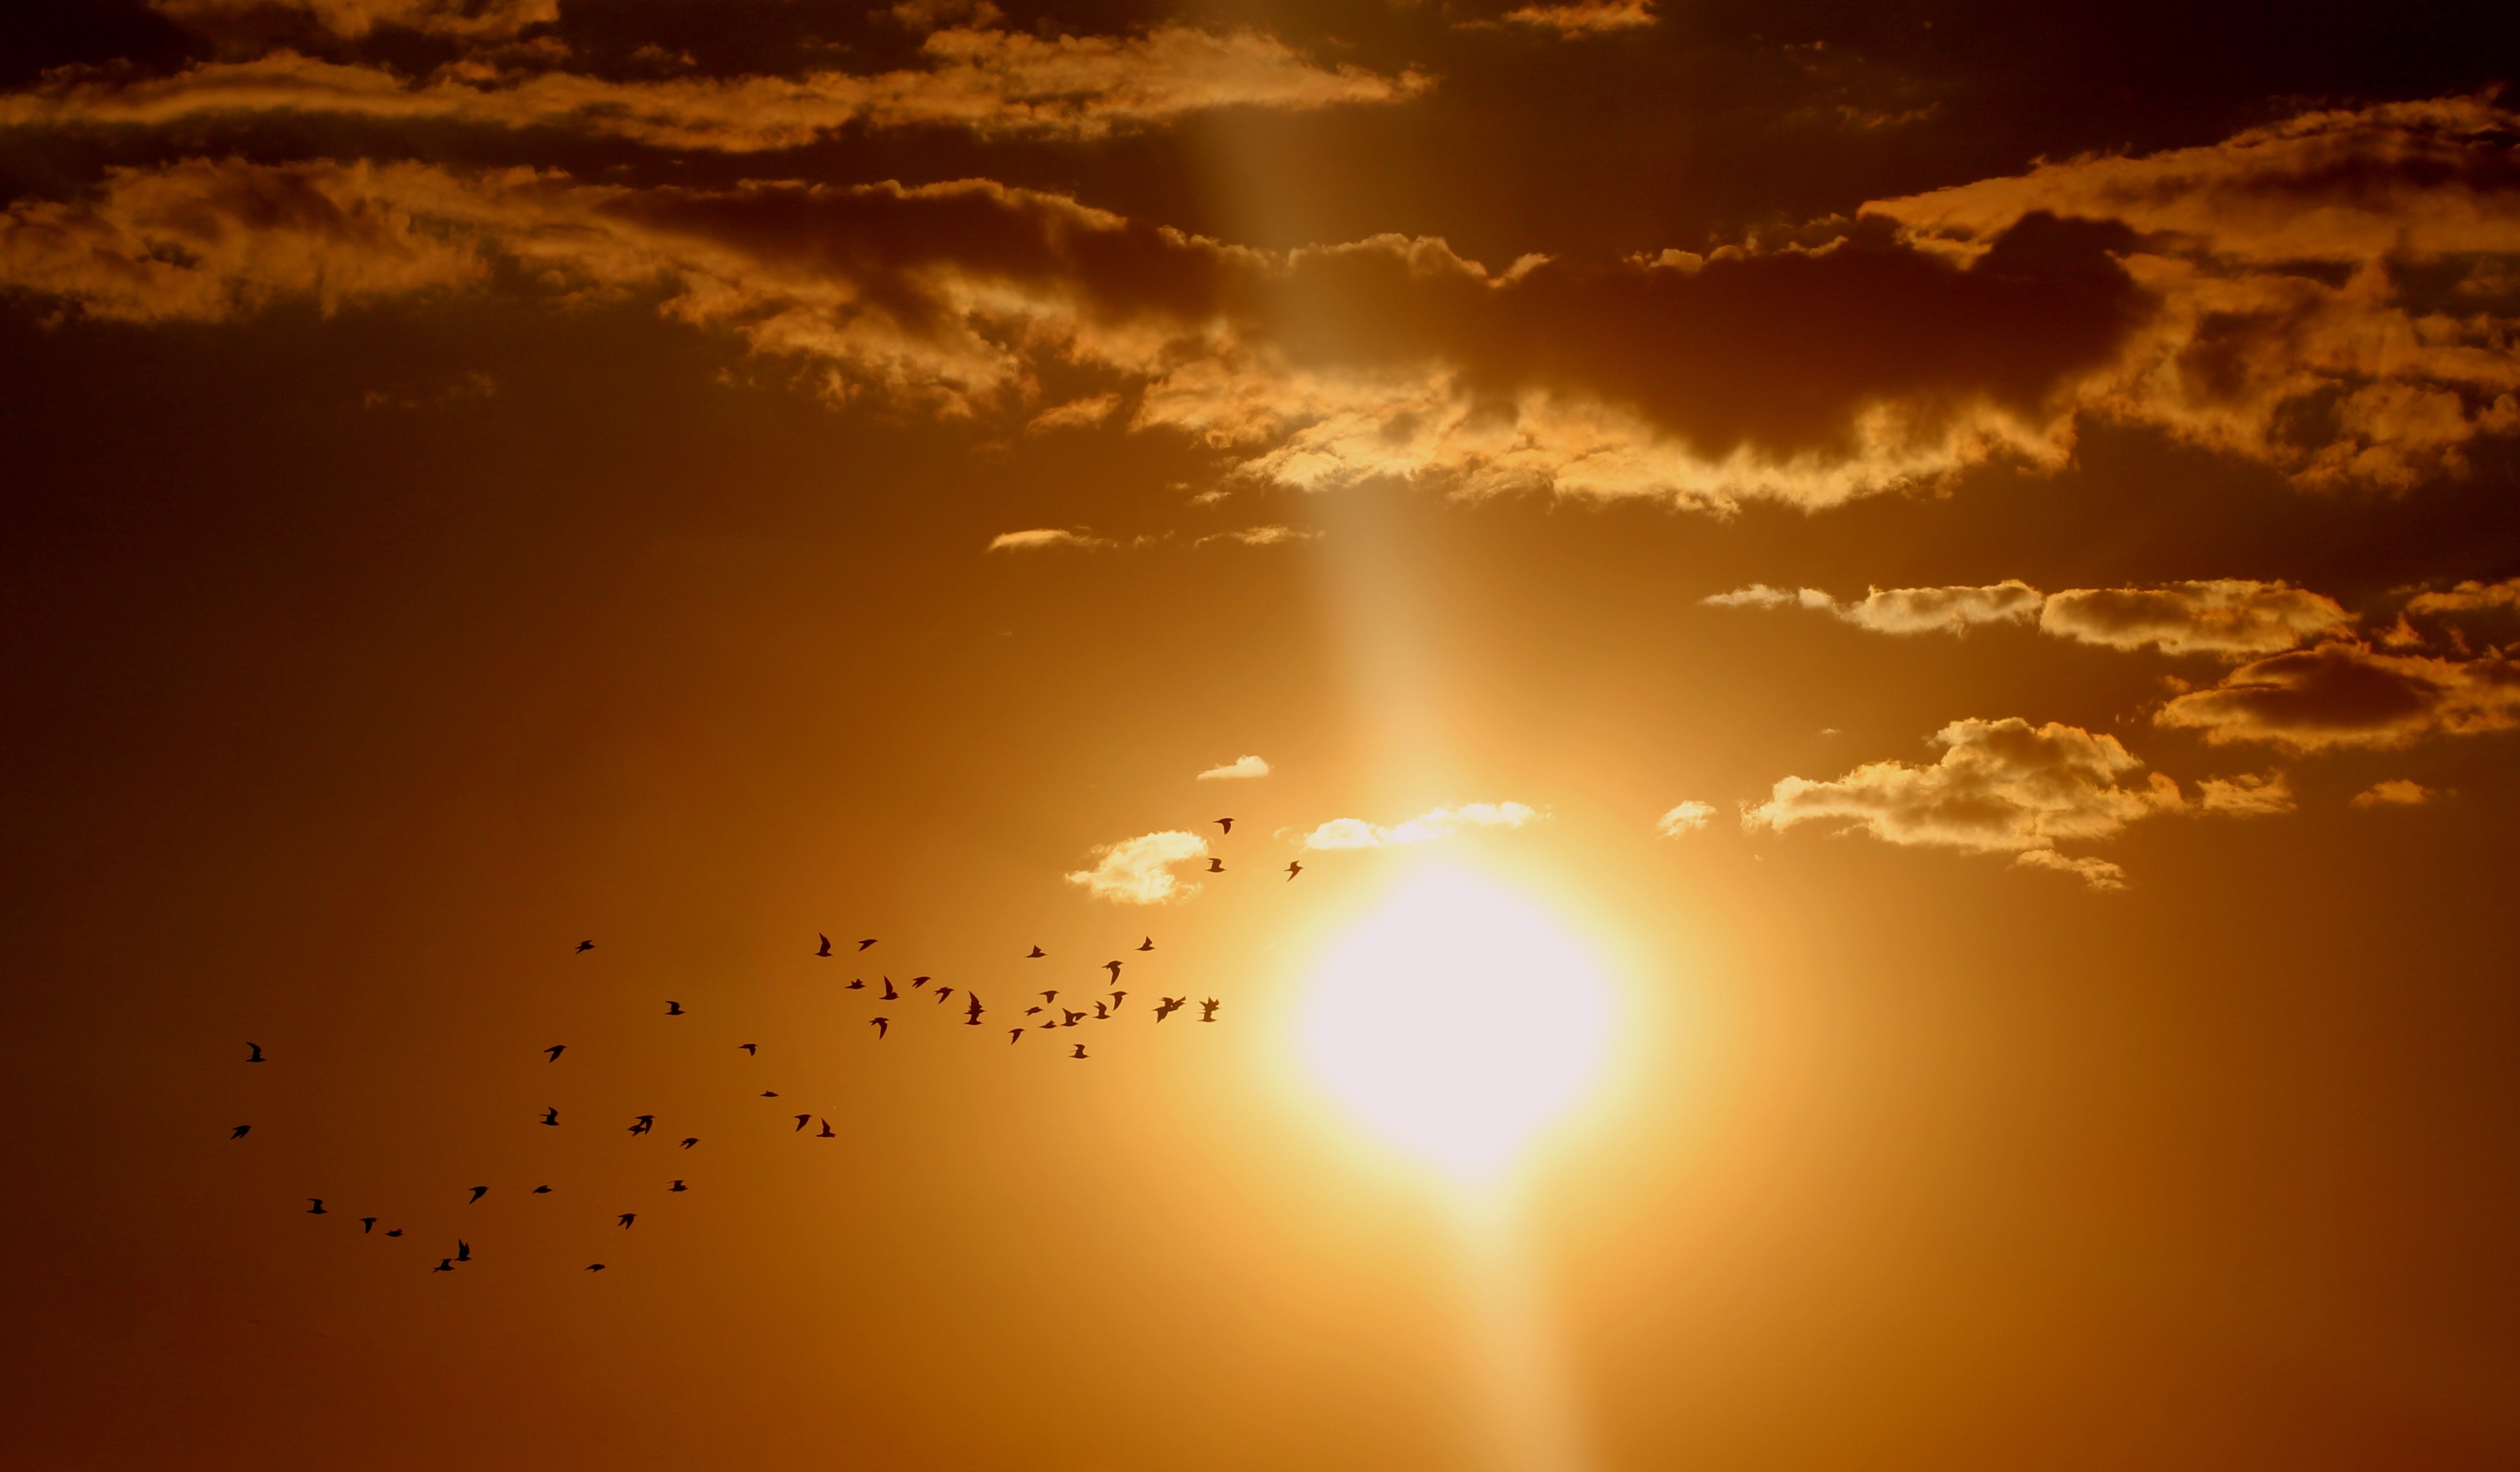 Flock of birds flying under sun and clouds photo